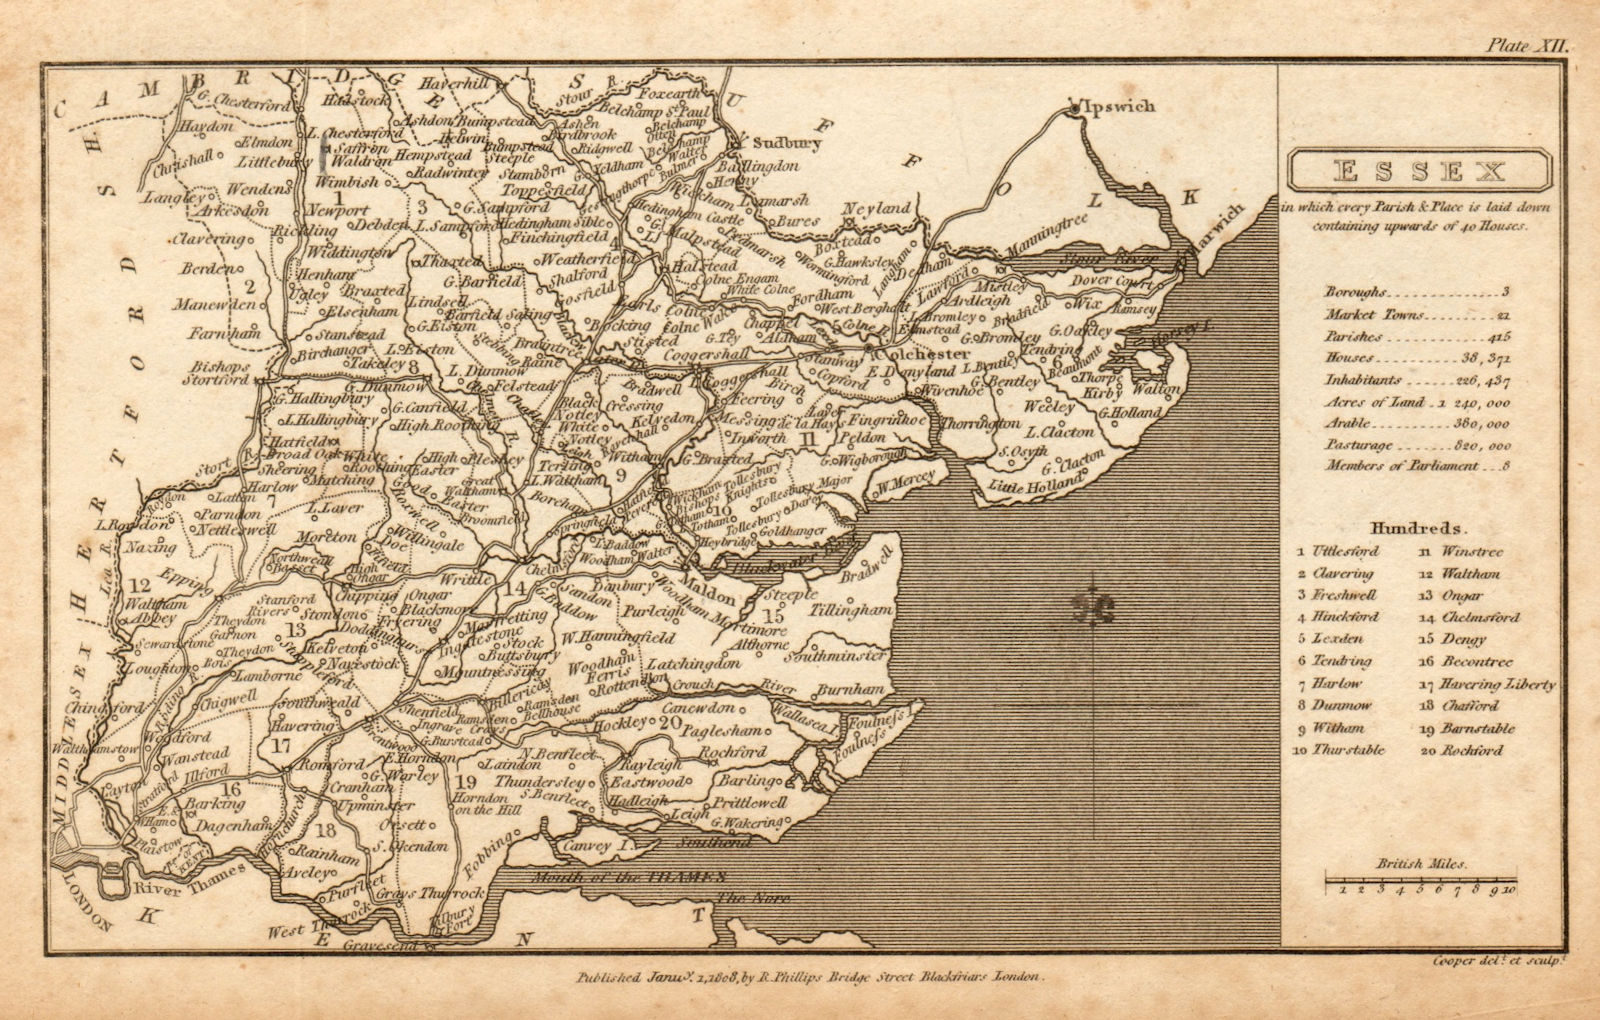 Antique county map of ESSEX by Henry Cooper for Benjamin Pitts Capper 1808